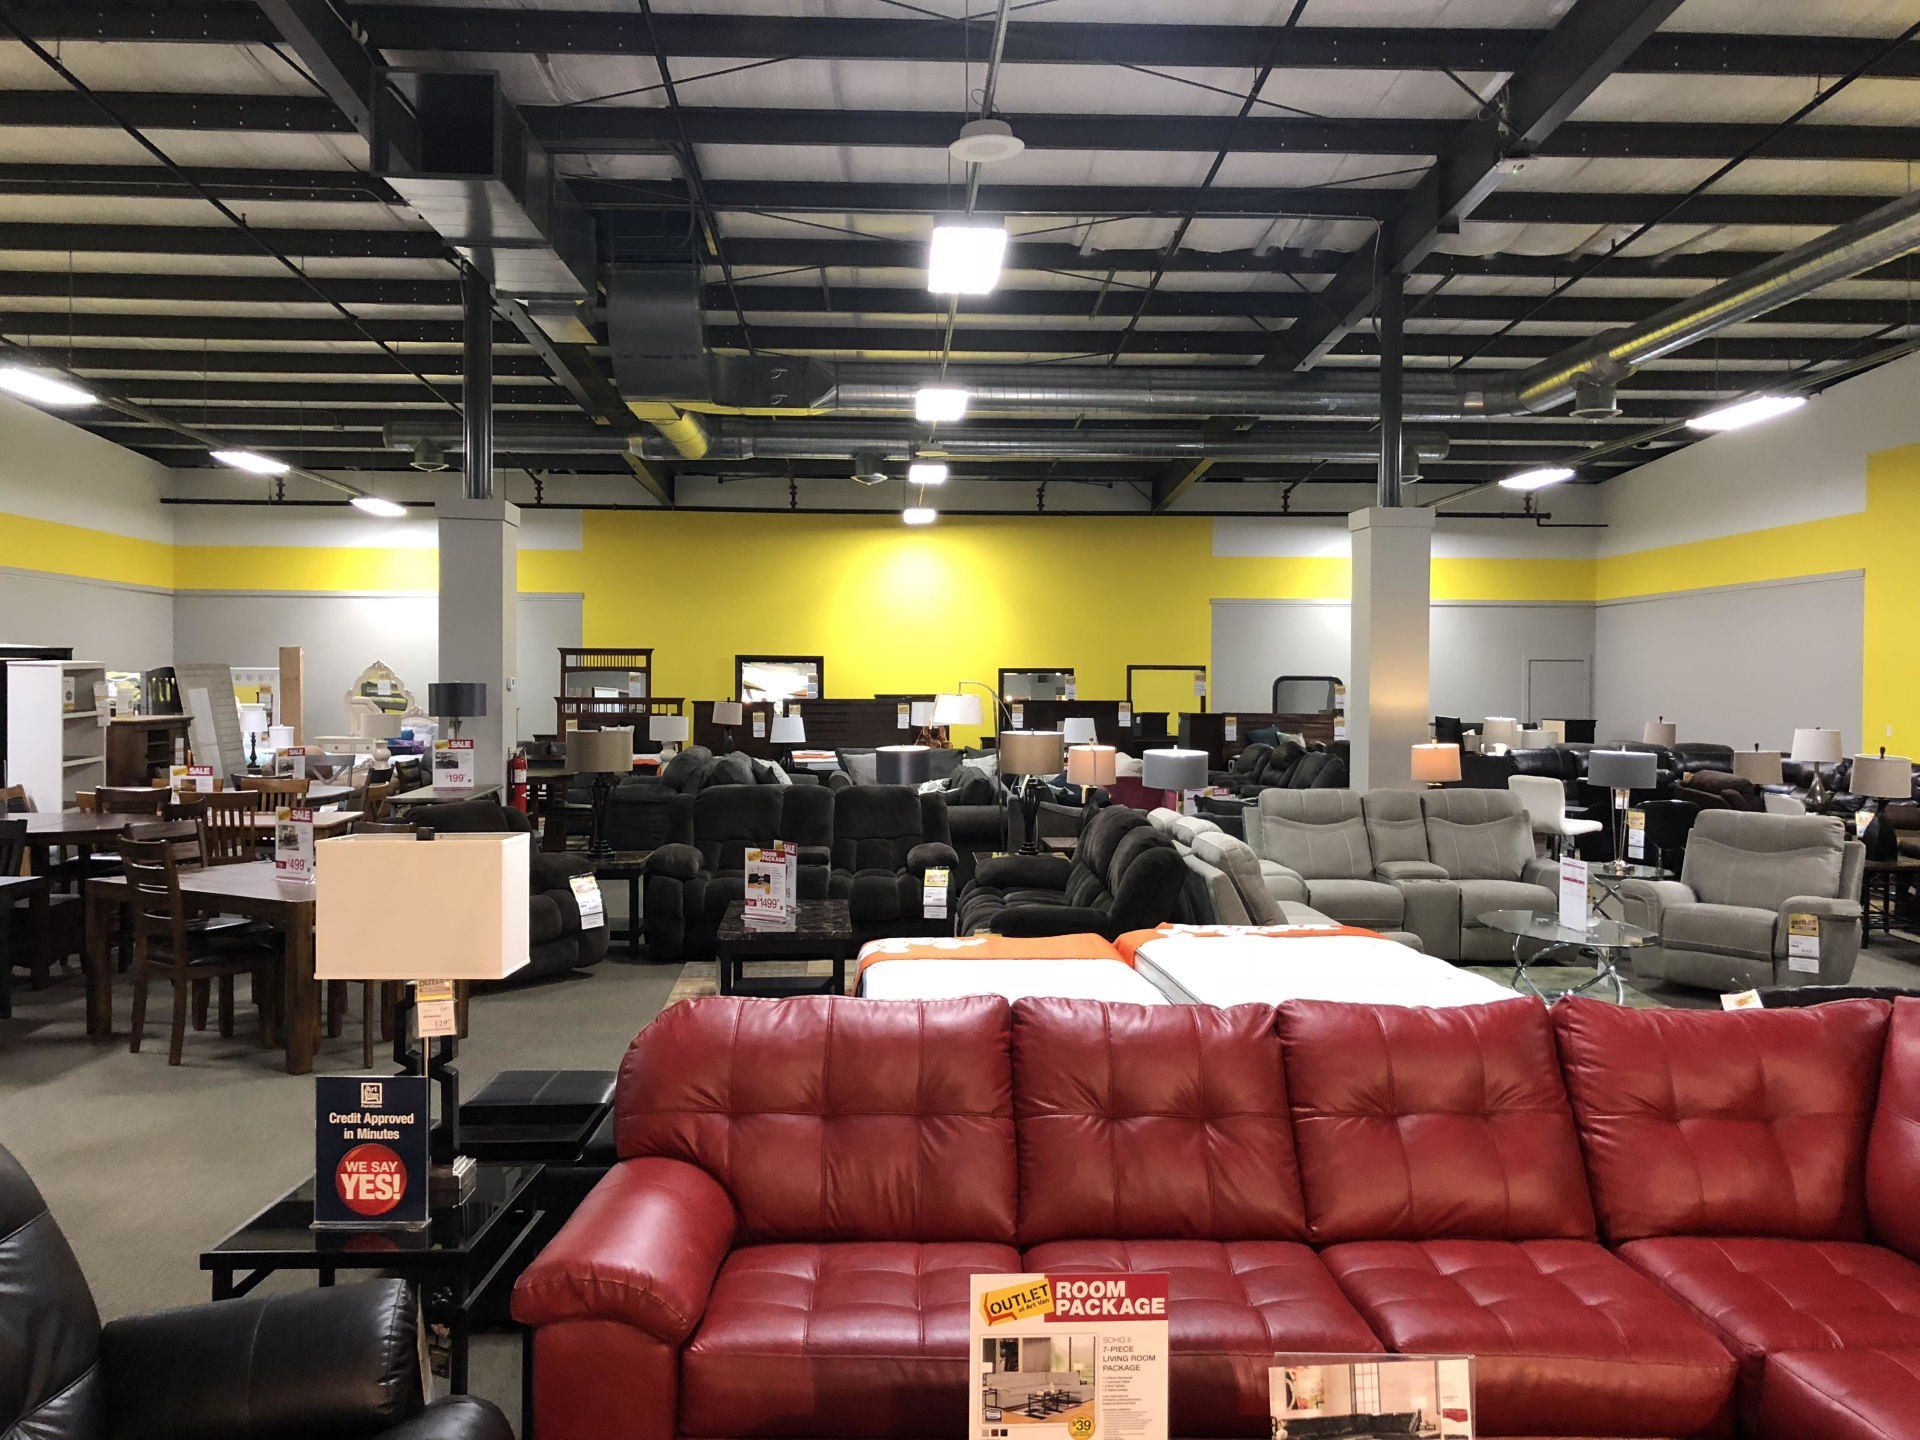 A Fresh New Look For Art Van Furniture In Rockford, IL